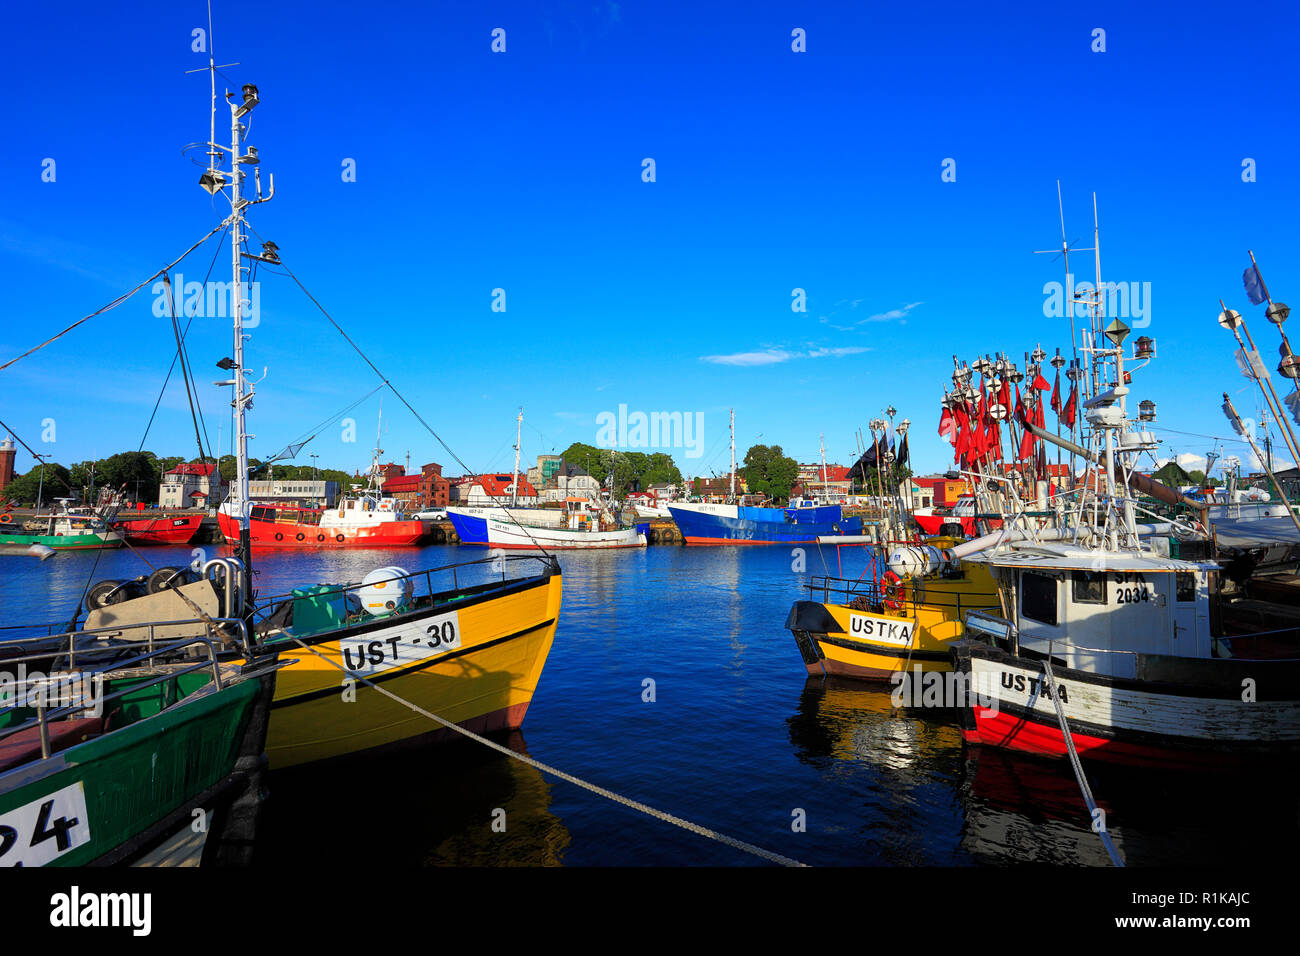 Ustka, Pomerania / Poland - 2009/07/02: Ustka fishing port with cutters and peers at the Baltic Sea shoreline Stock Photo